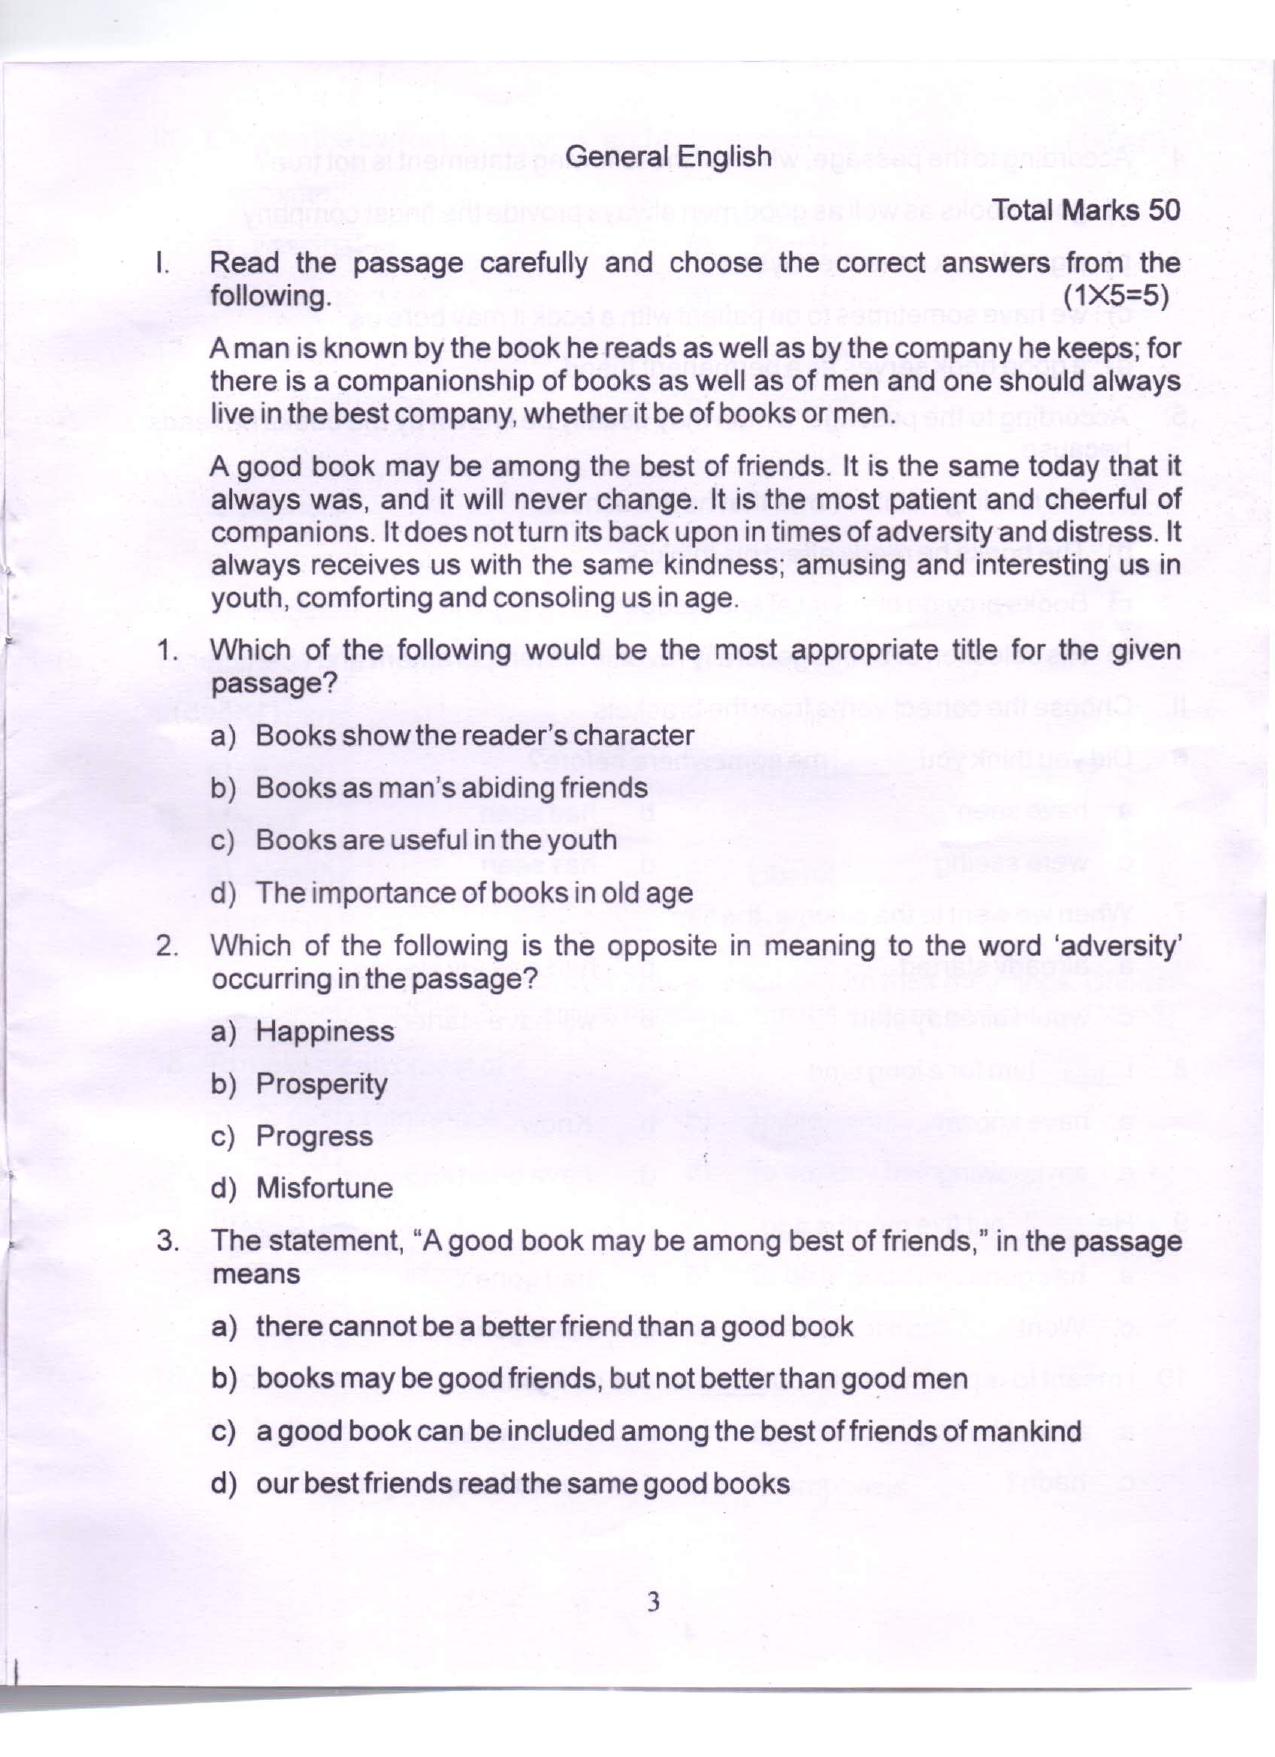 PDF Download Of SPSC MPHW General English & General Knowledge Previous Papers - Page 2